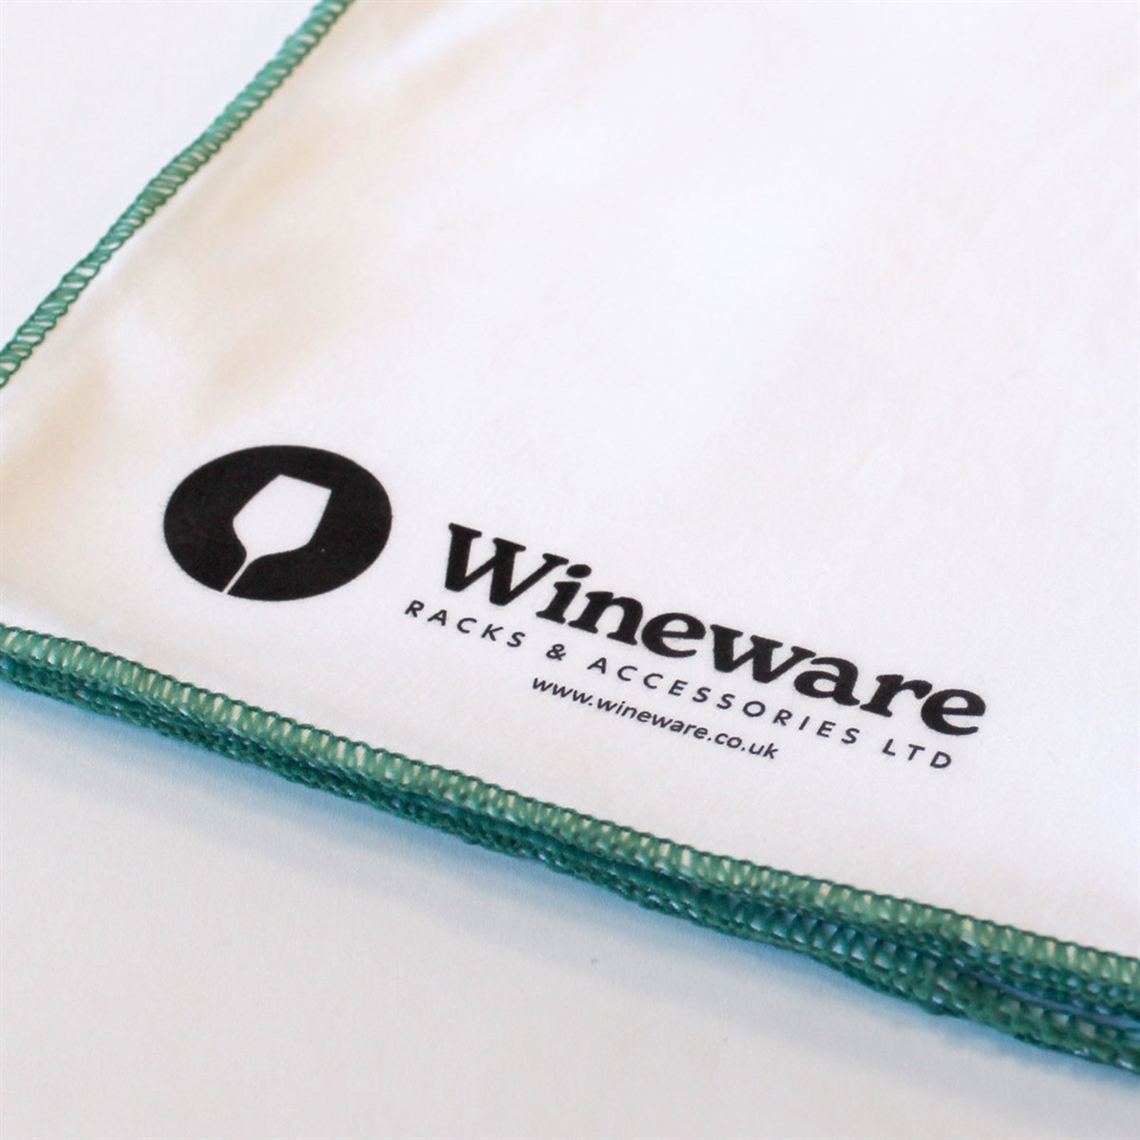 View more beginners guide to different types of wine glasses from our Wine Glass Cleaning & Accessories range